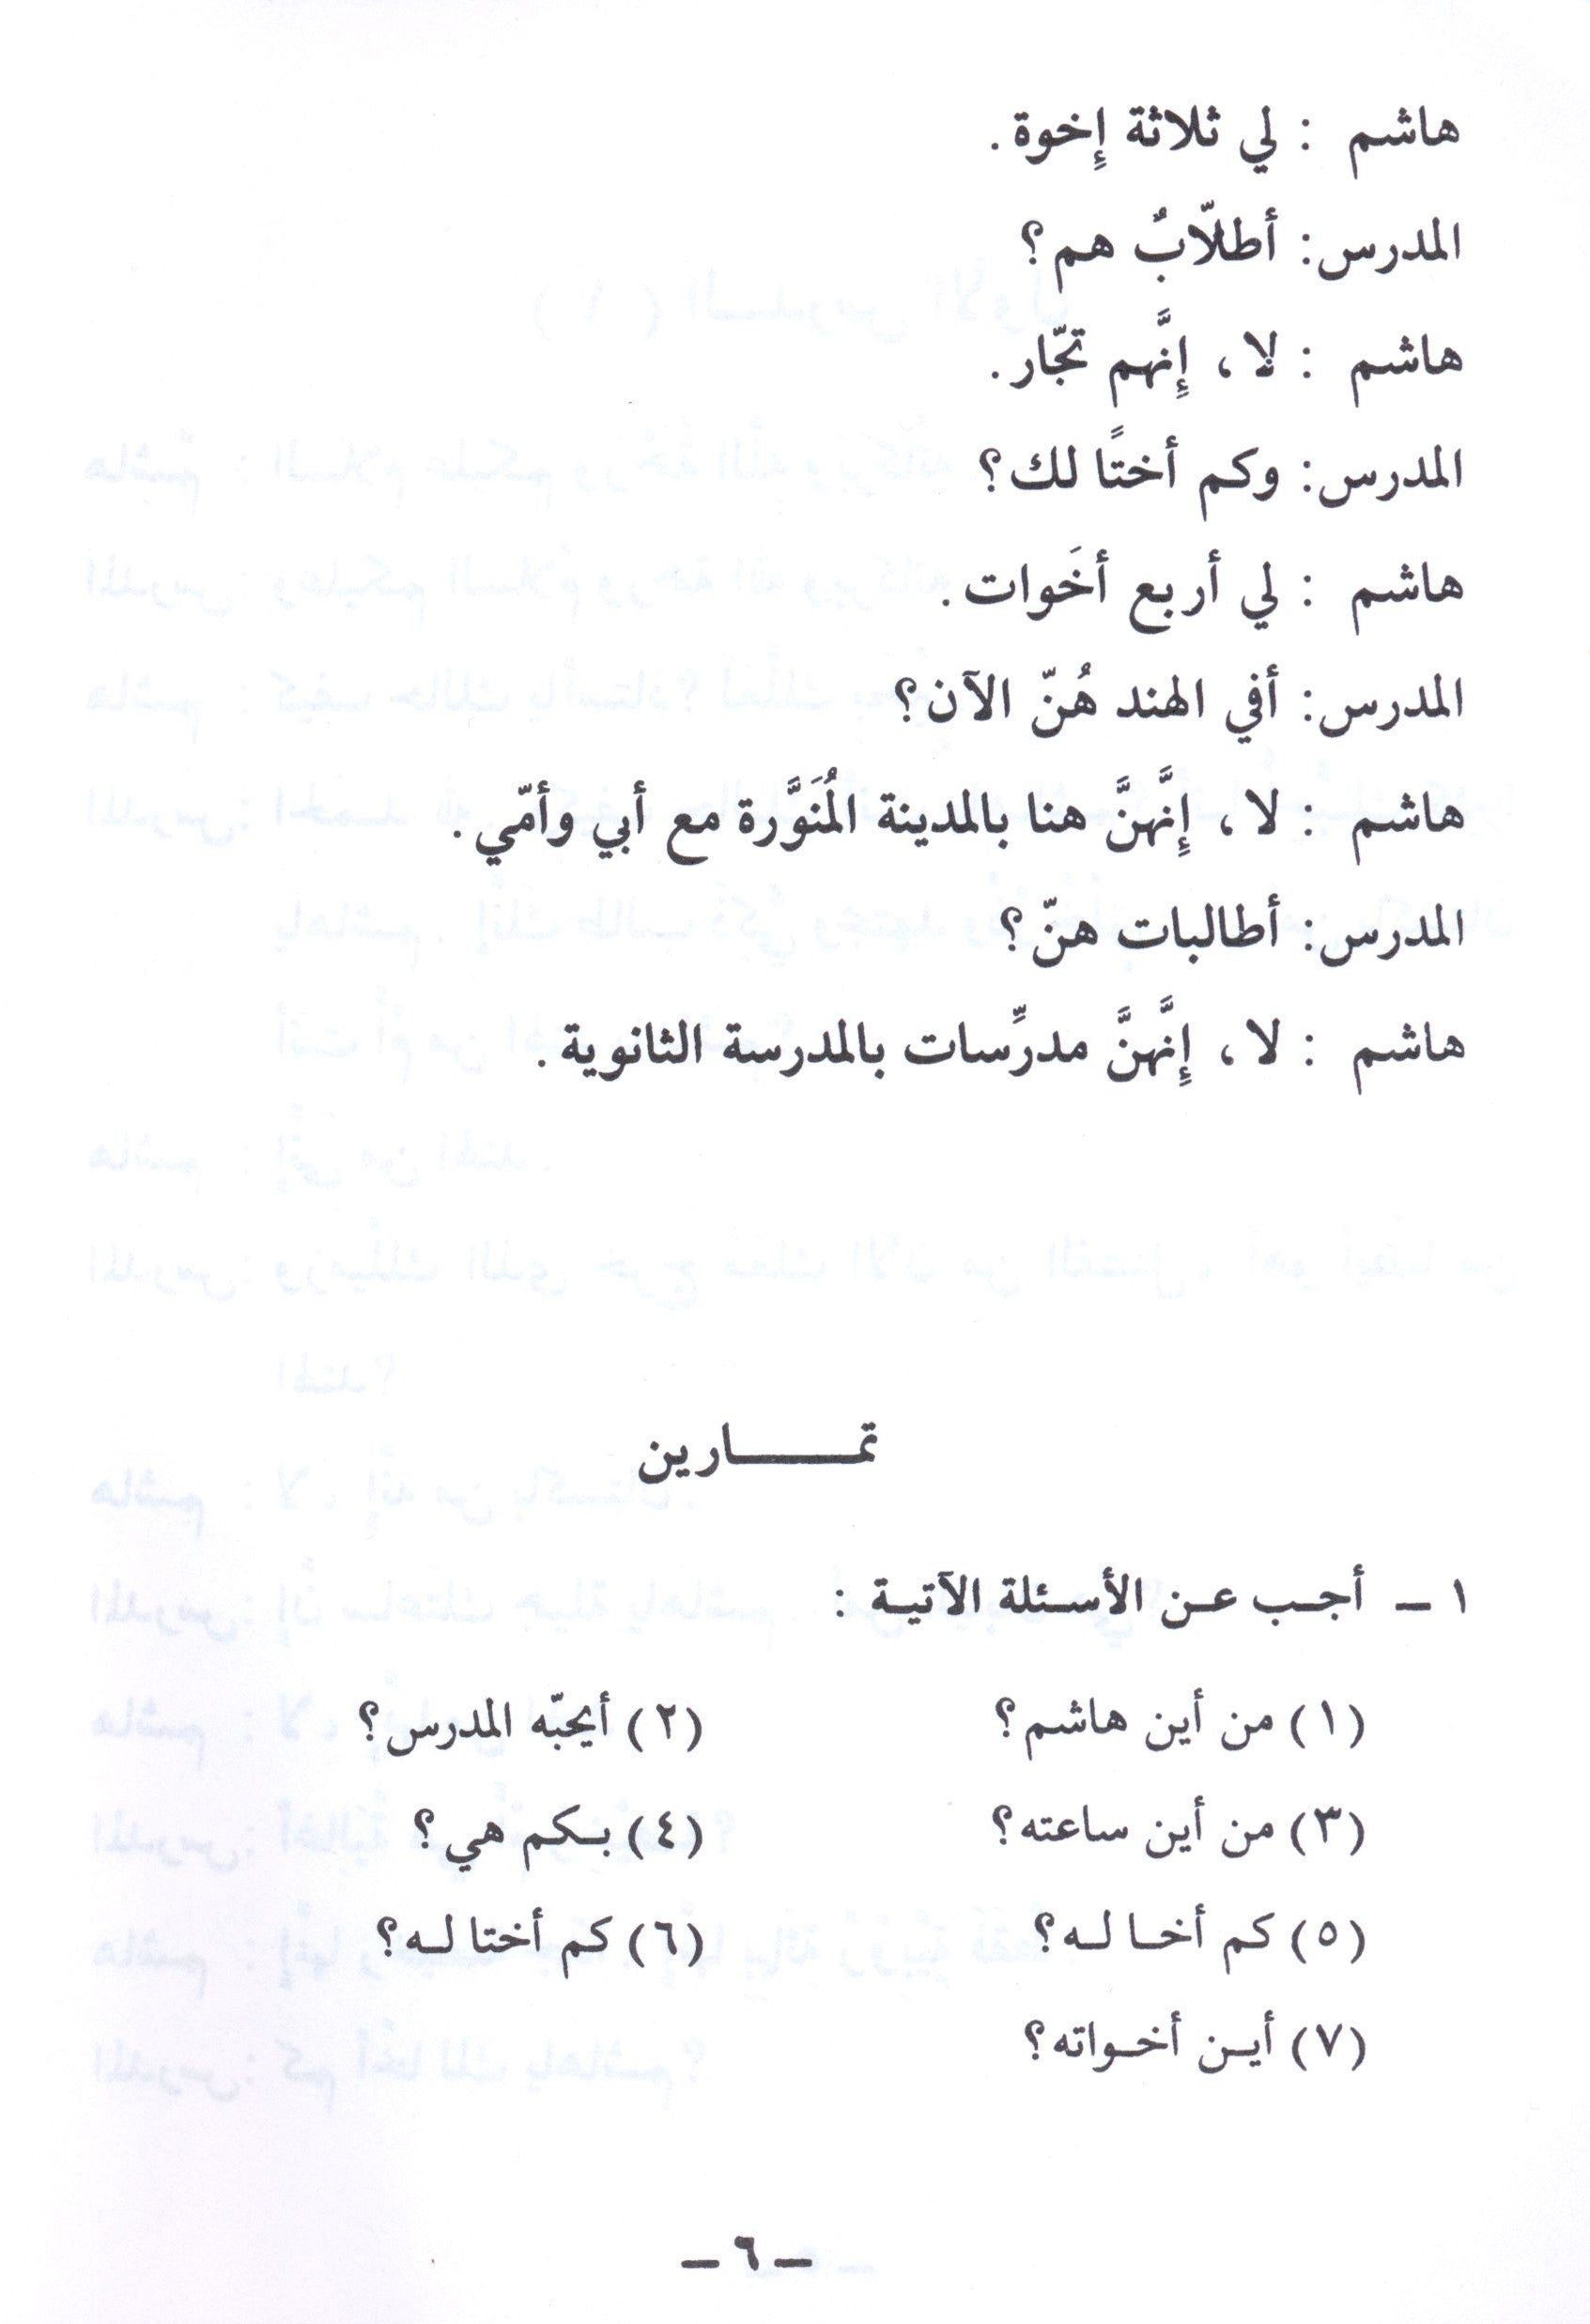 Arabic Course for English Speaking Students Volume 2